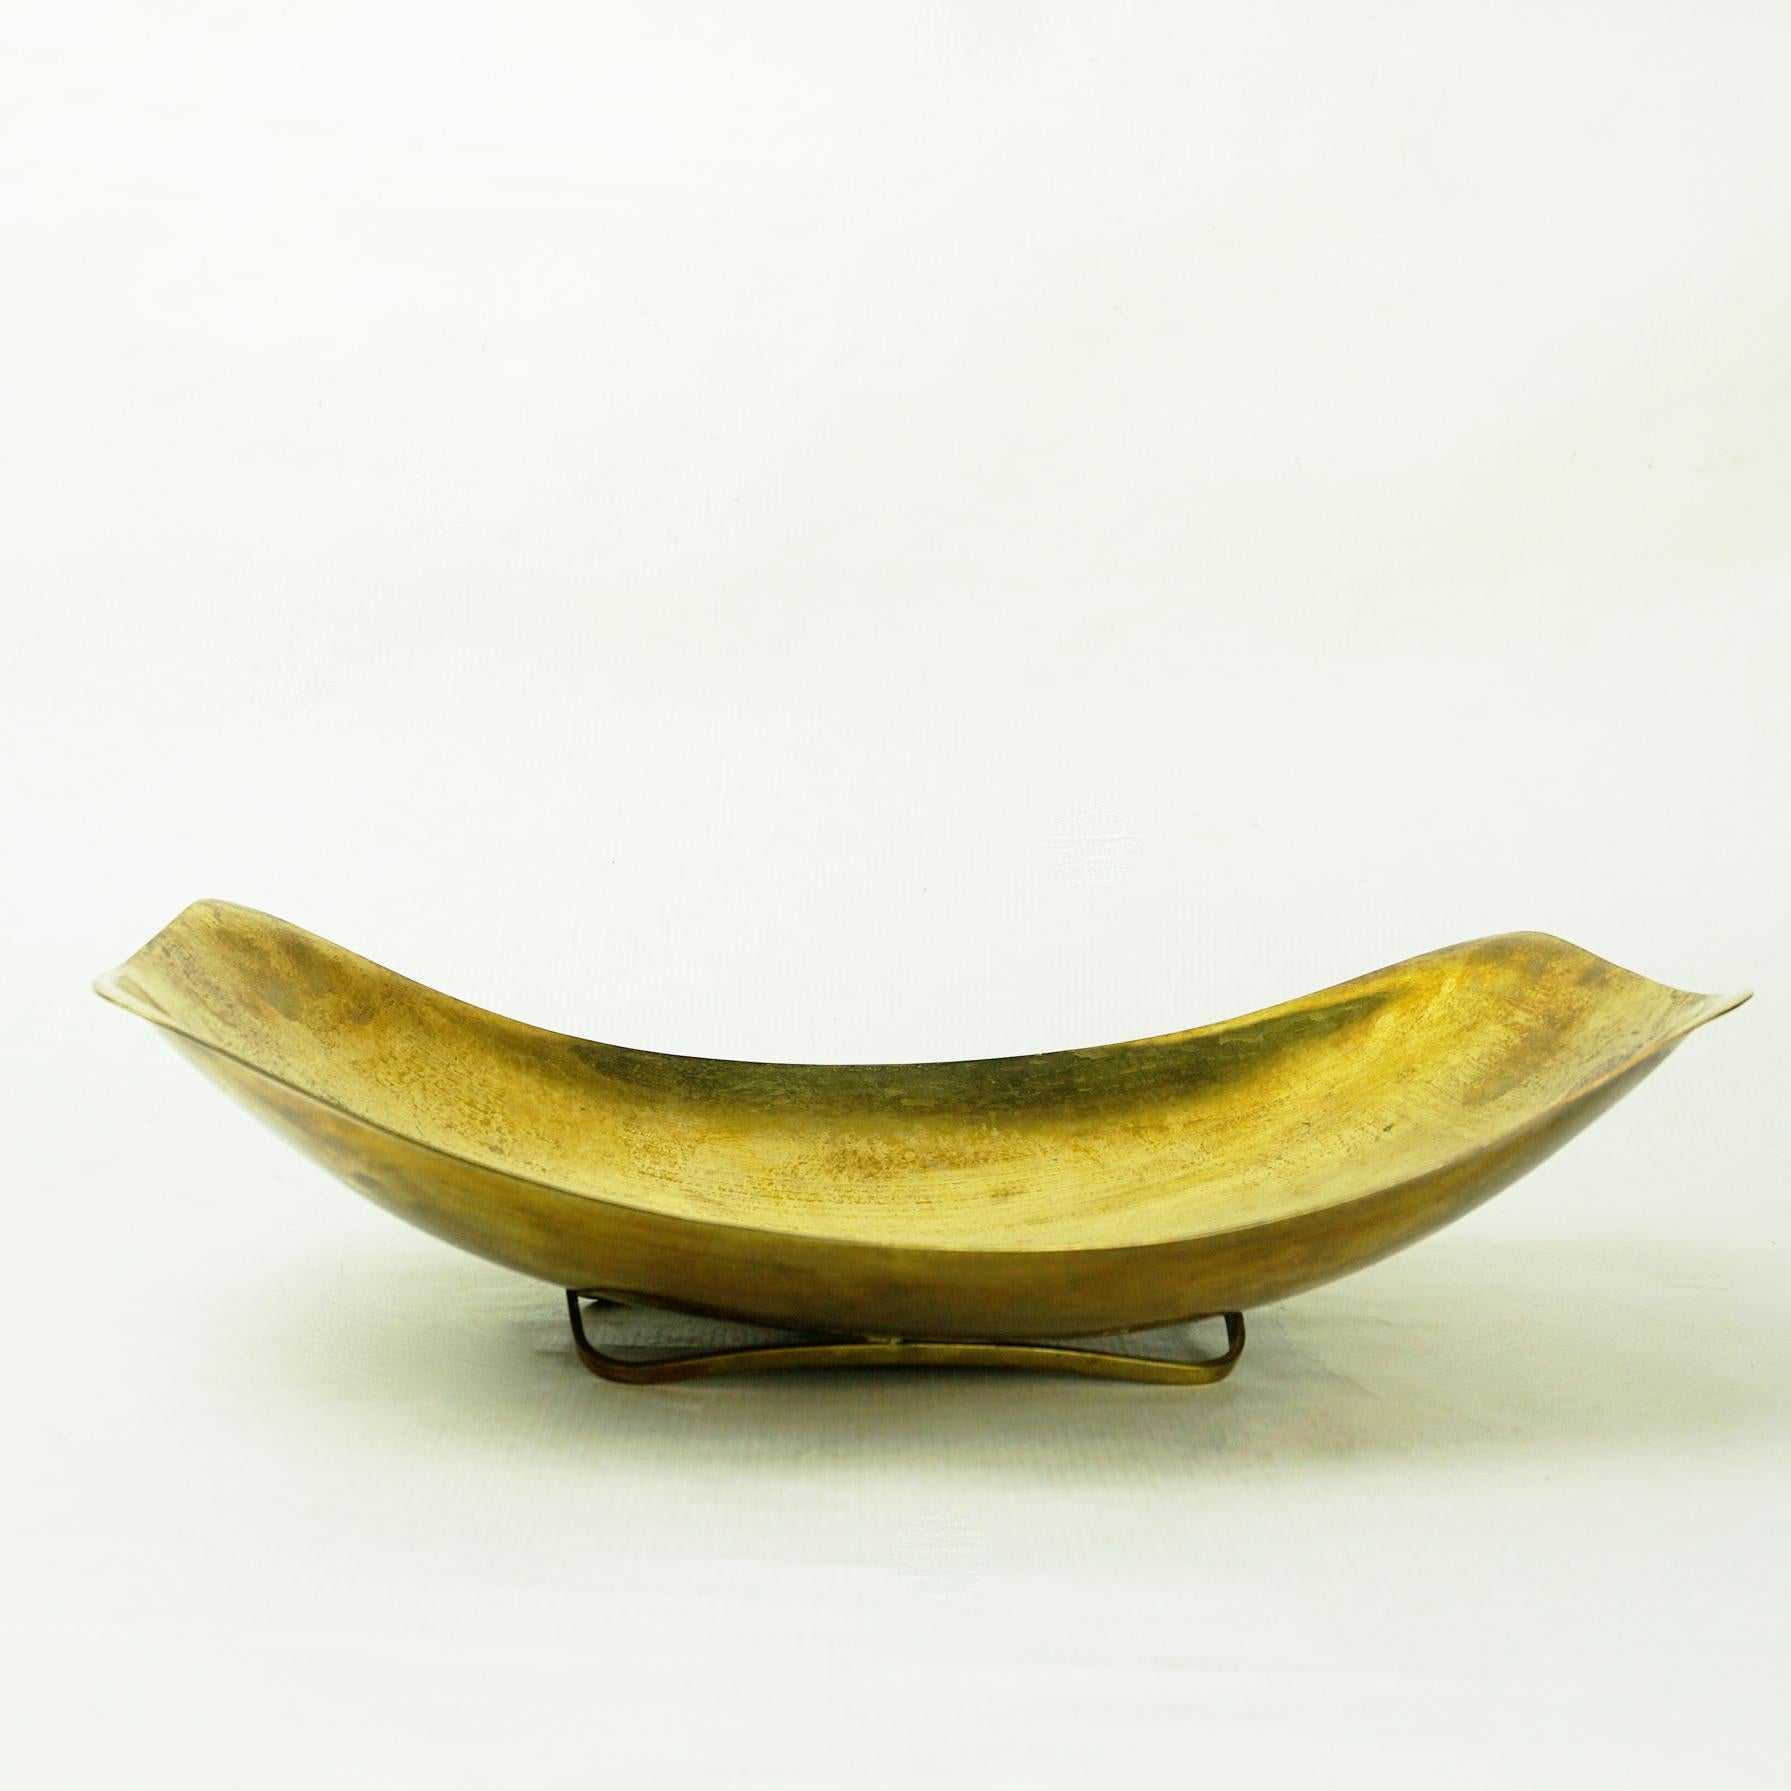 Charming Austrian mid-century brass fruit bowl or fruit basket. Style and high quality of its design is very close to works by Werkstätte Hagenauer, it is not signed. Beautiful and valuable addition to any Mid-Century Modern home decoration to use